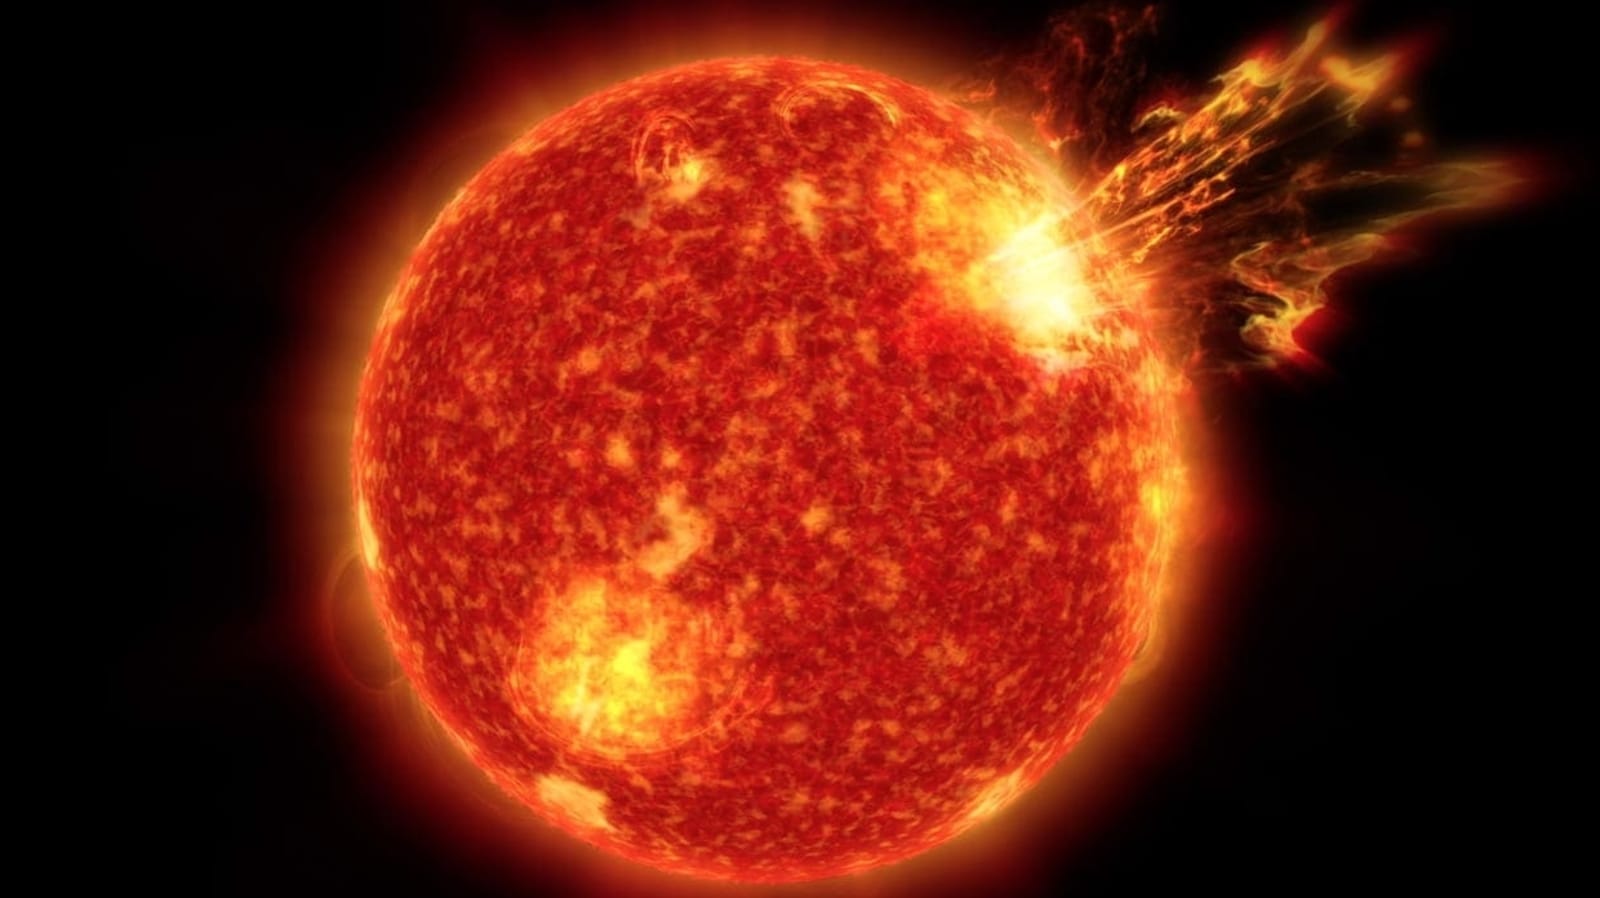 Portion of Sun breaks off, scientists baffled